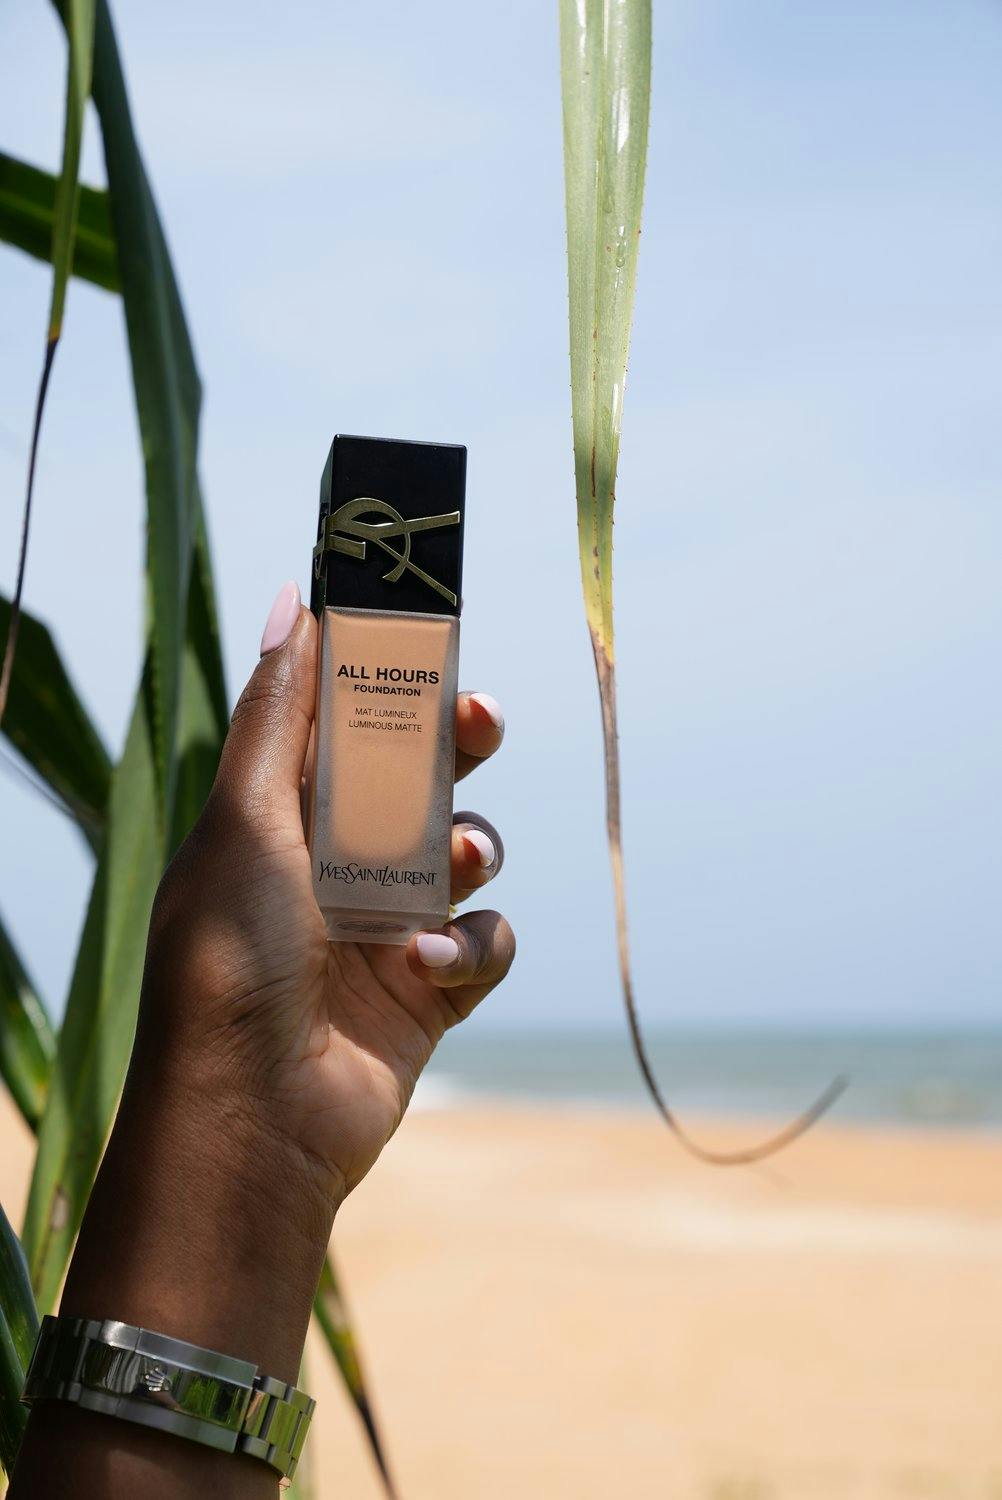 Sachini Dilanka reviewing YSL All Hours Foundation 